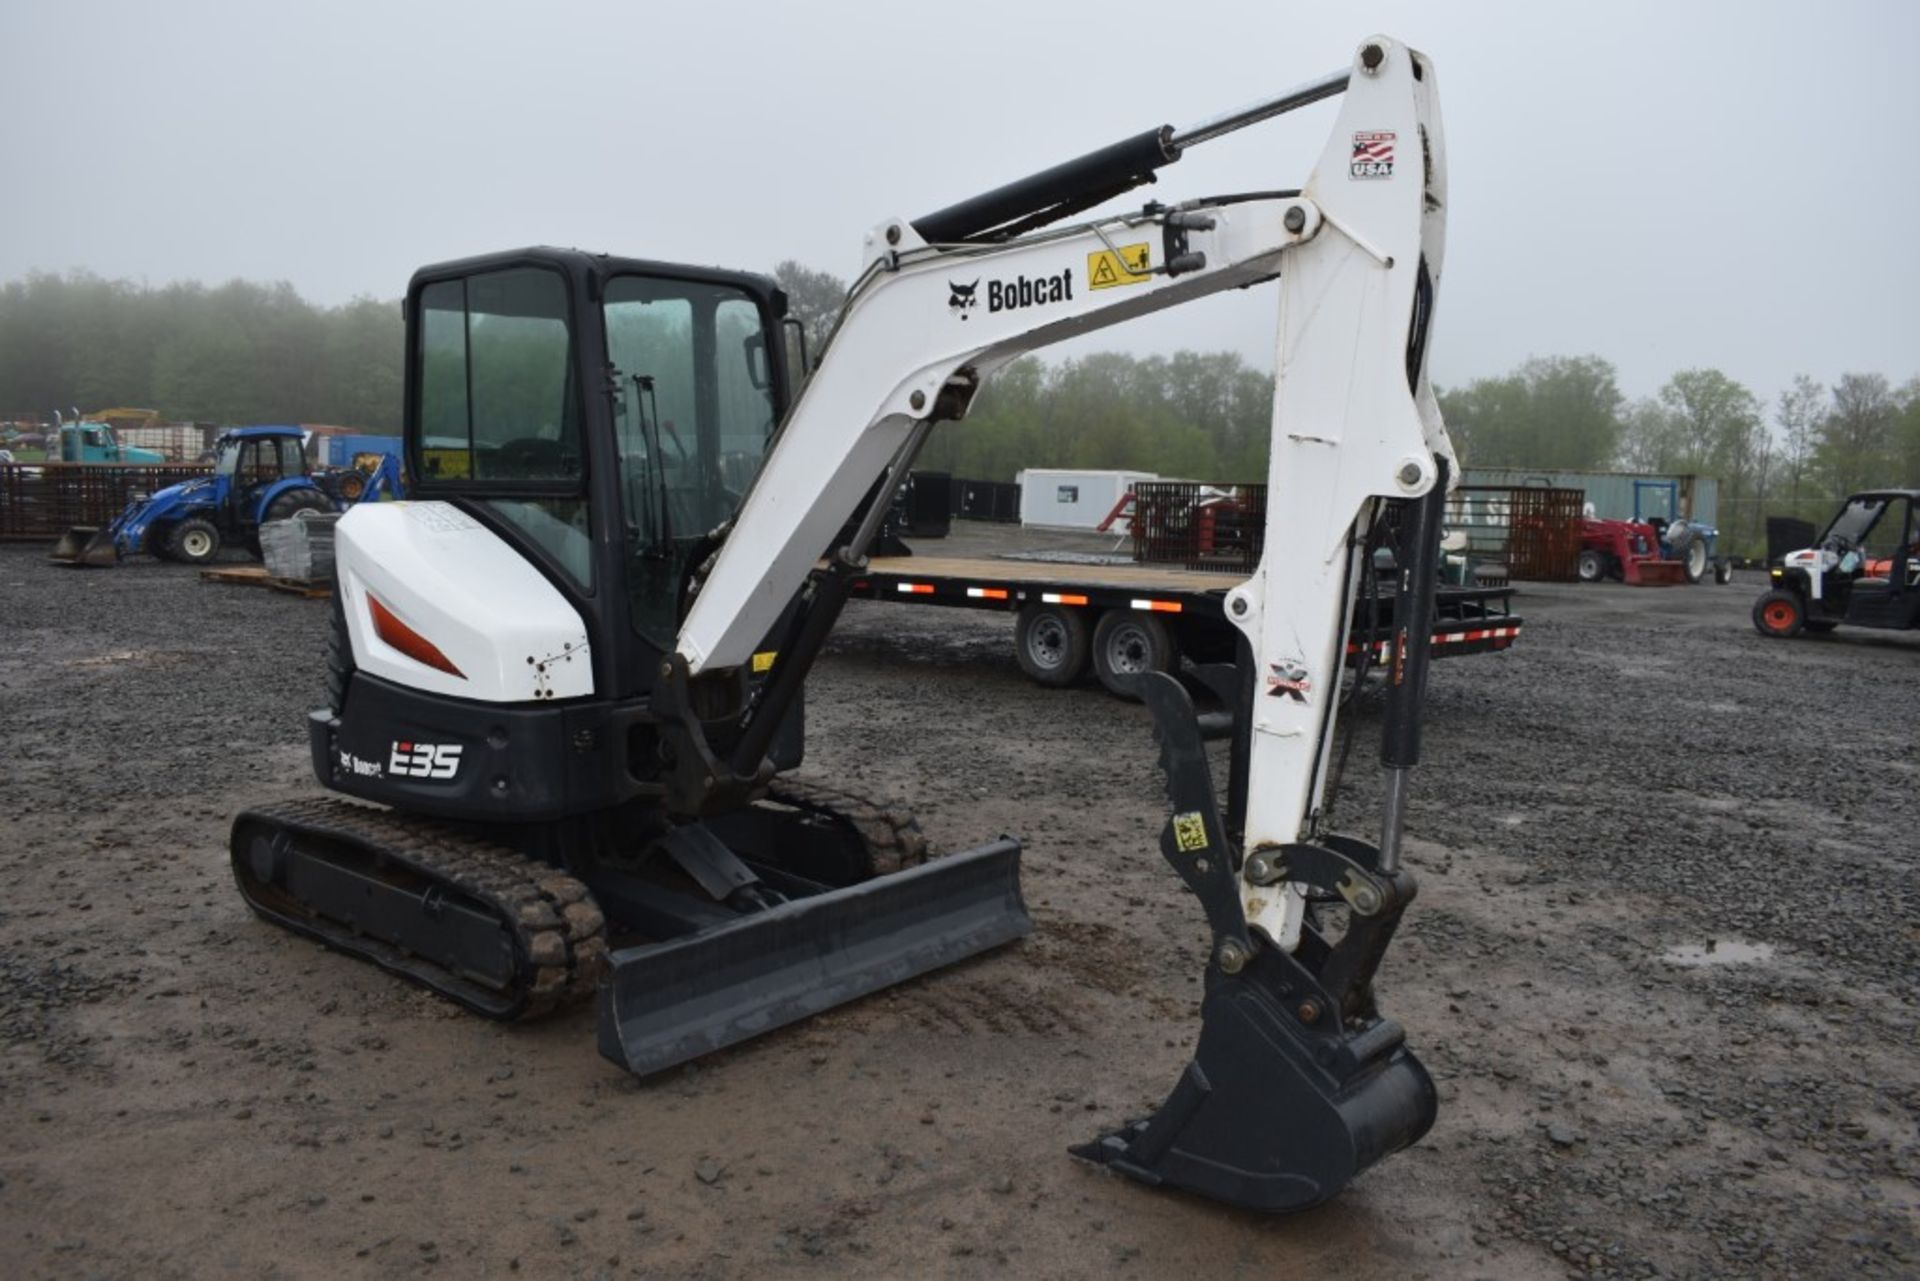 2020 Bobcat E35i Excavator 1006 Hours, Runs and Operates, 18" Bucket, Dual Auxiliary Hydraulics, - Image 7 of 36